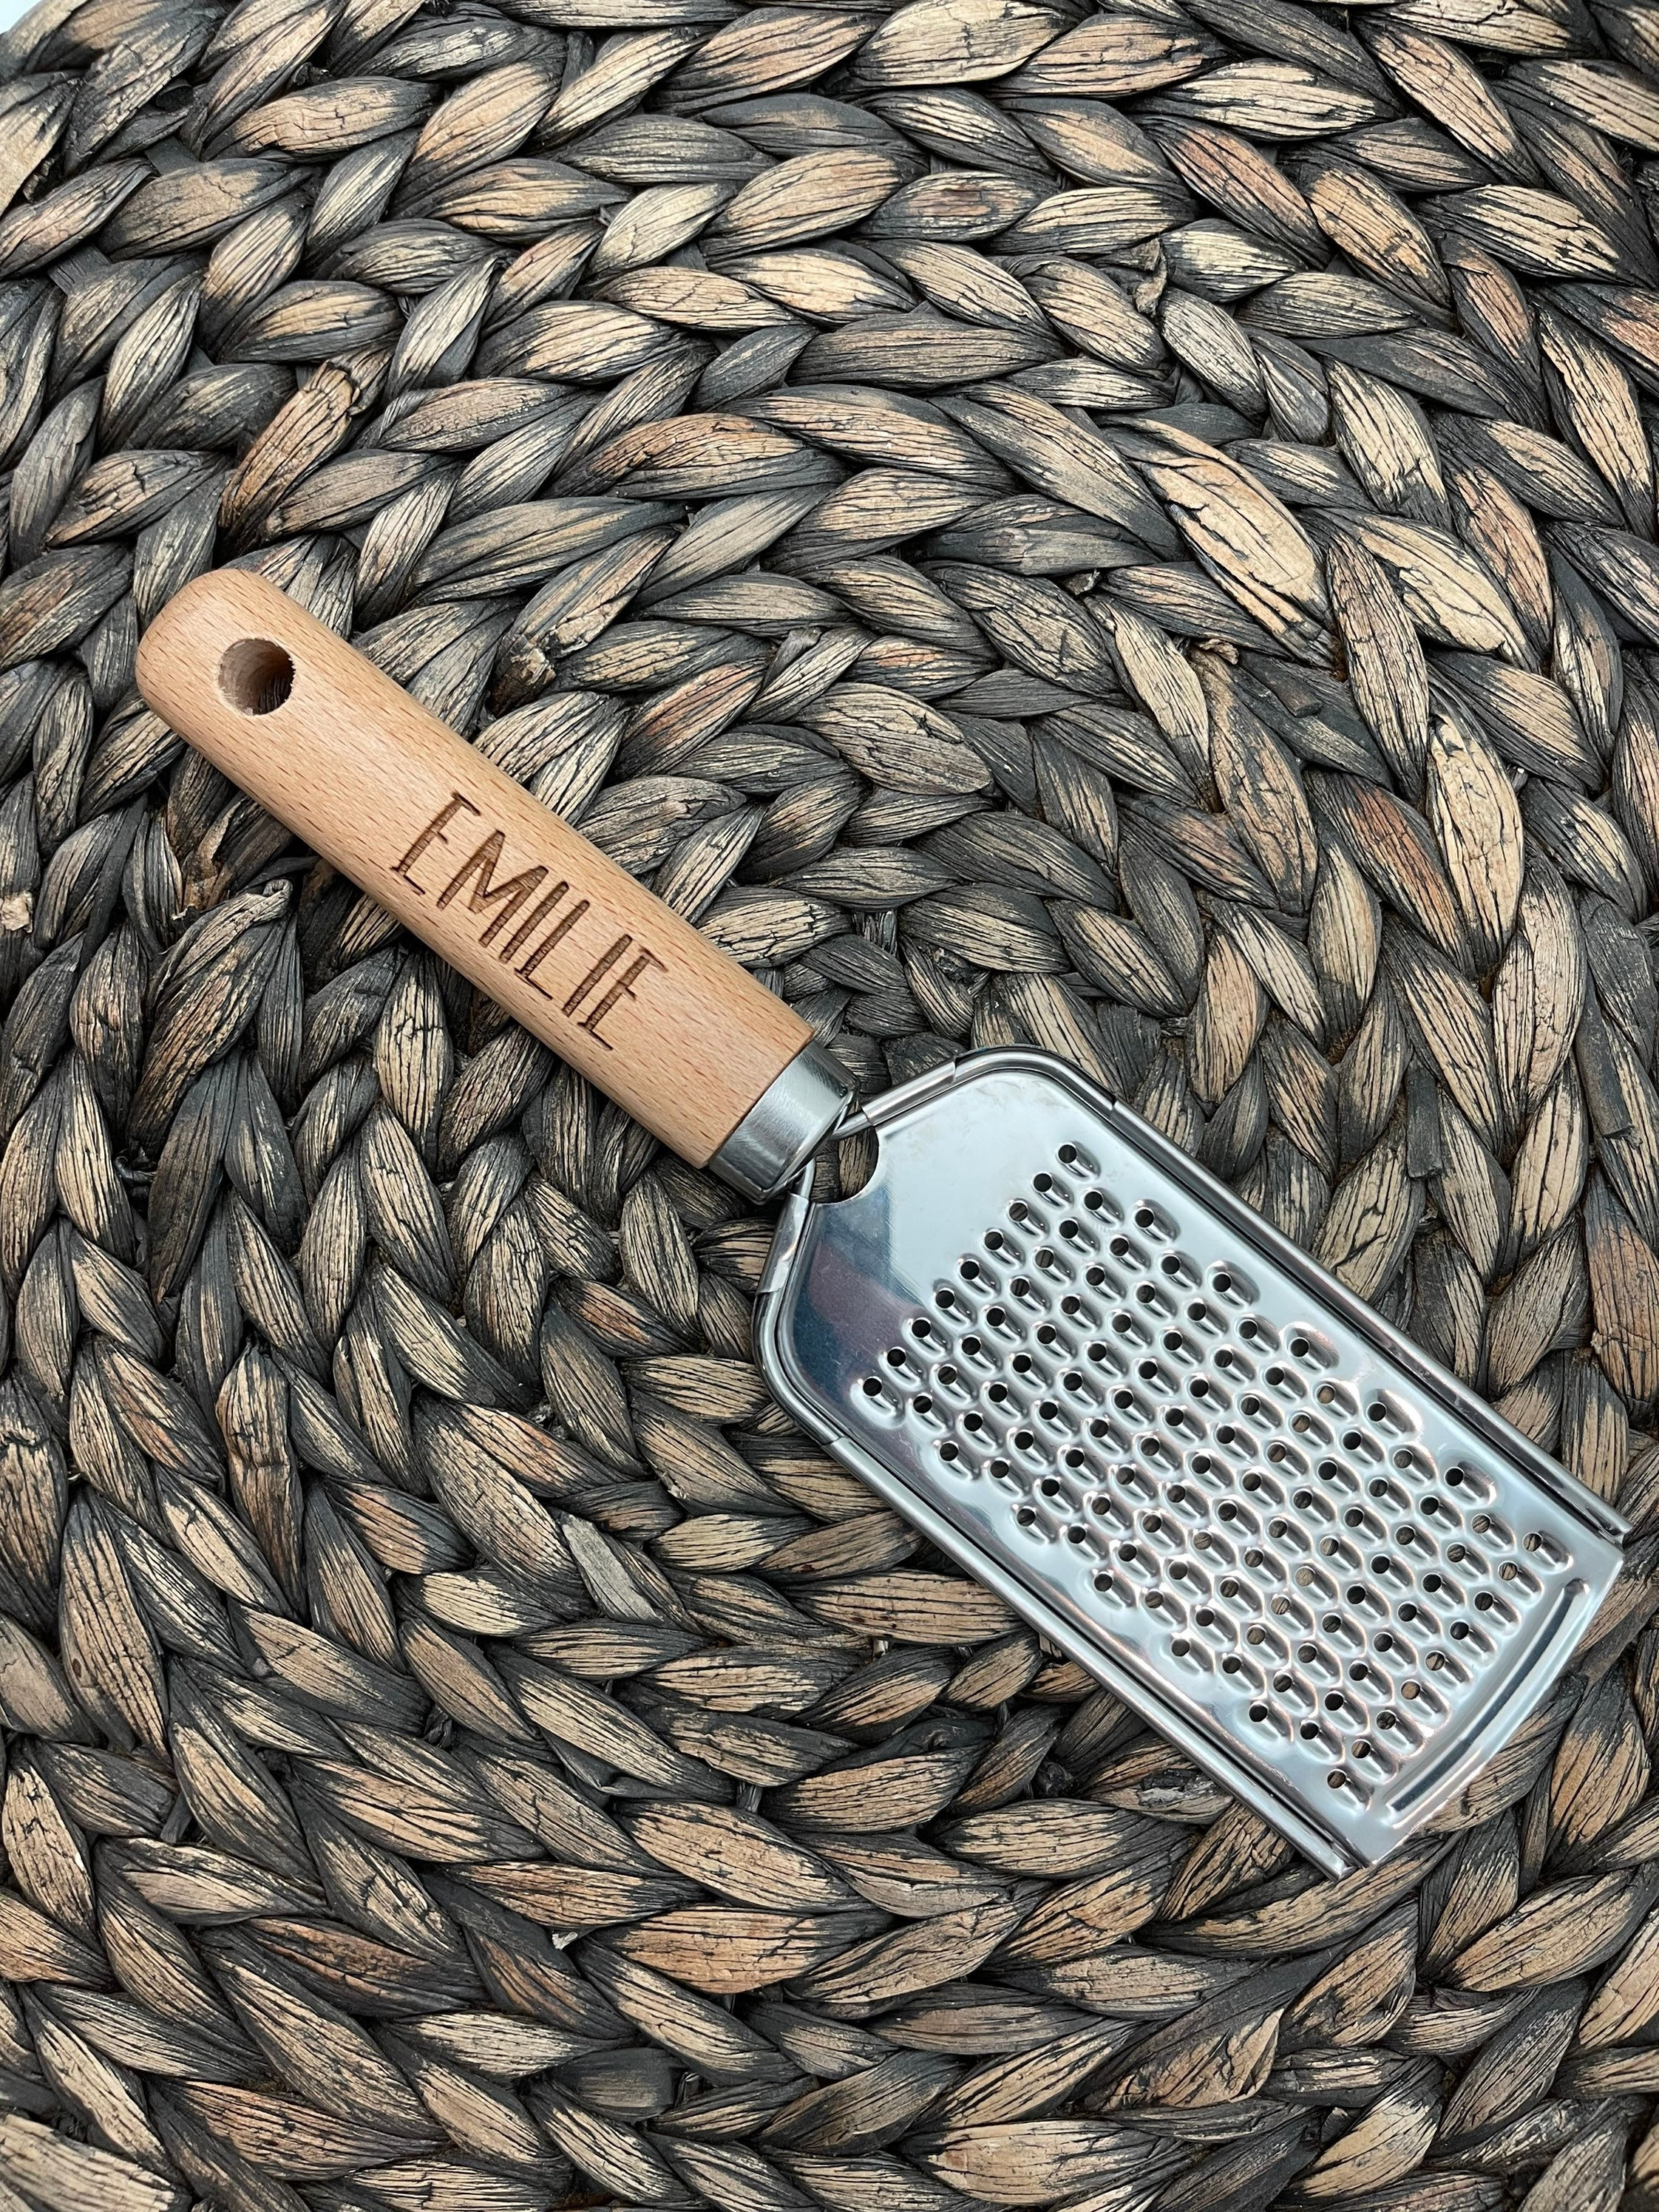 Fridja Cheese Grater, Hand-held Stainless Steel Zester for Kitchen for Home  